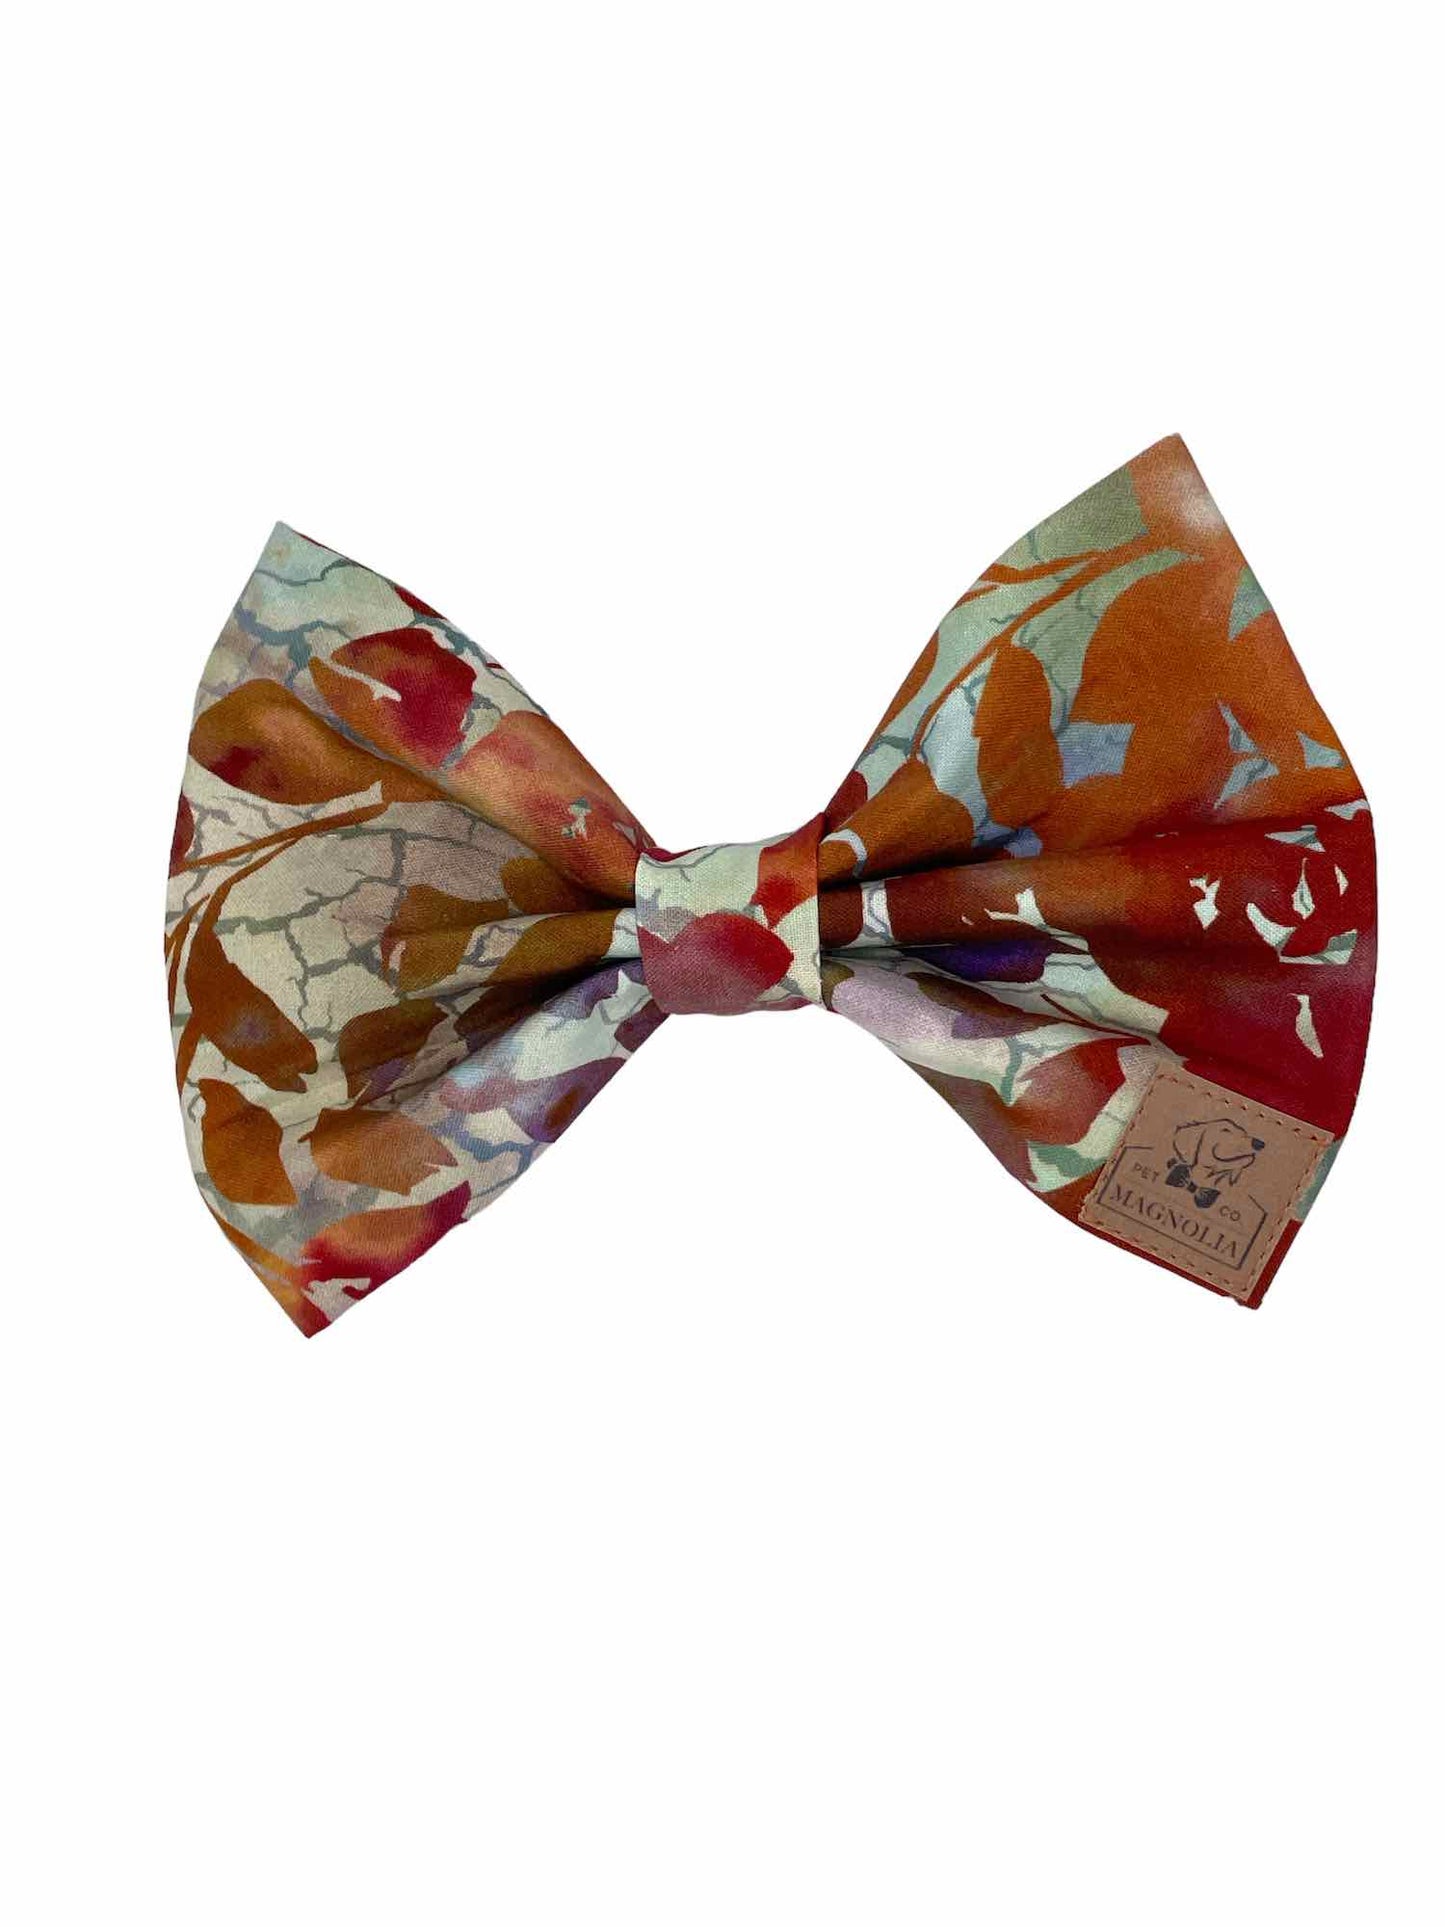 Fall Leaves Dog Bow Tie